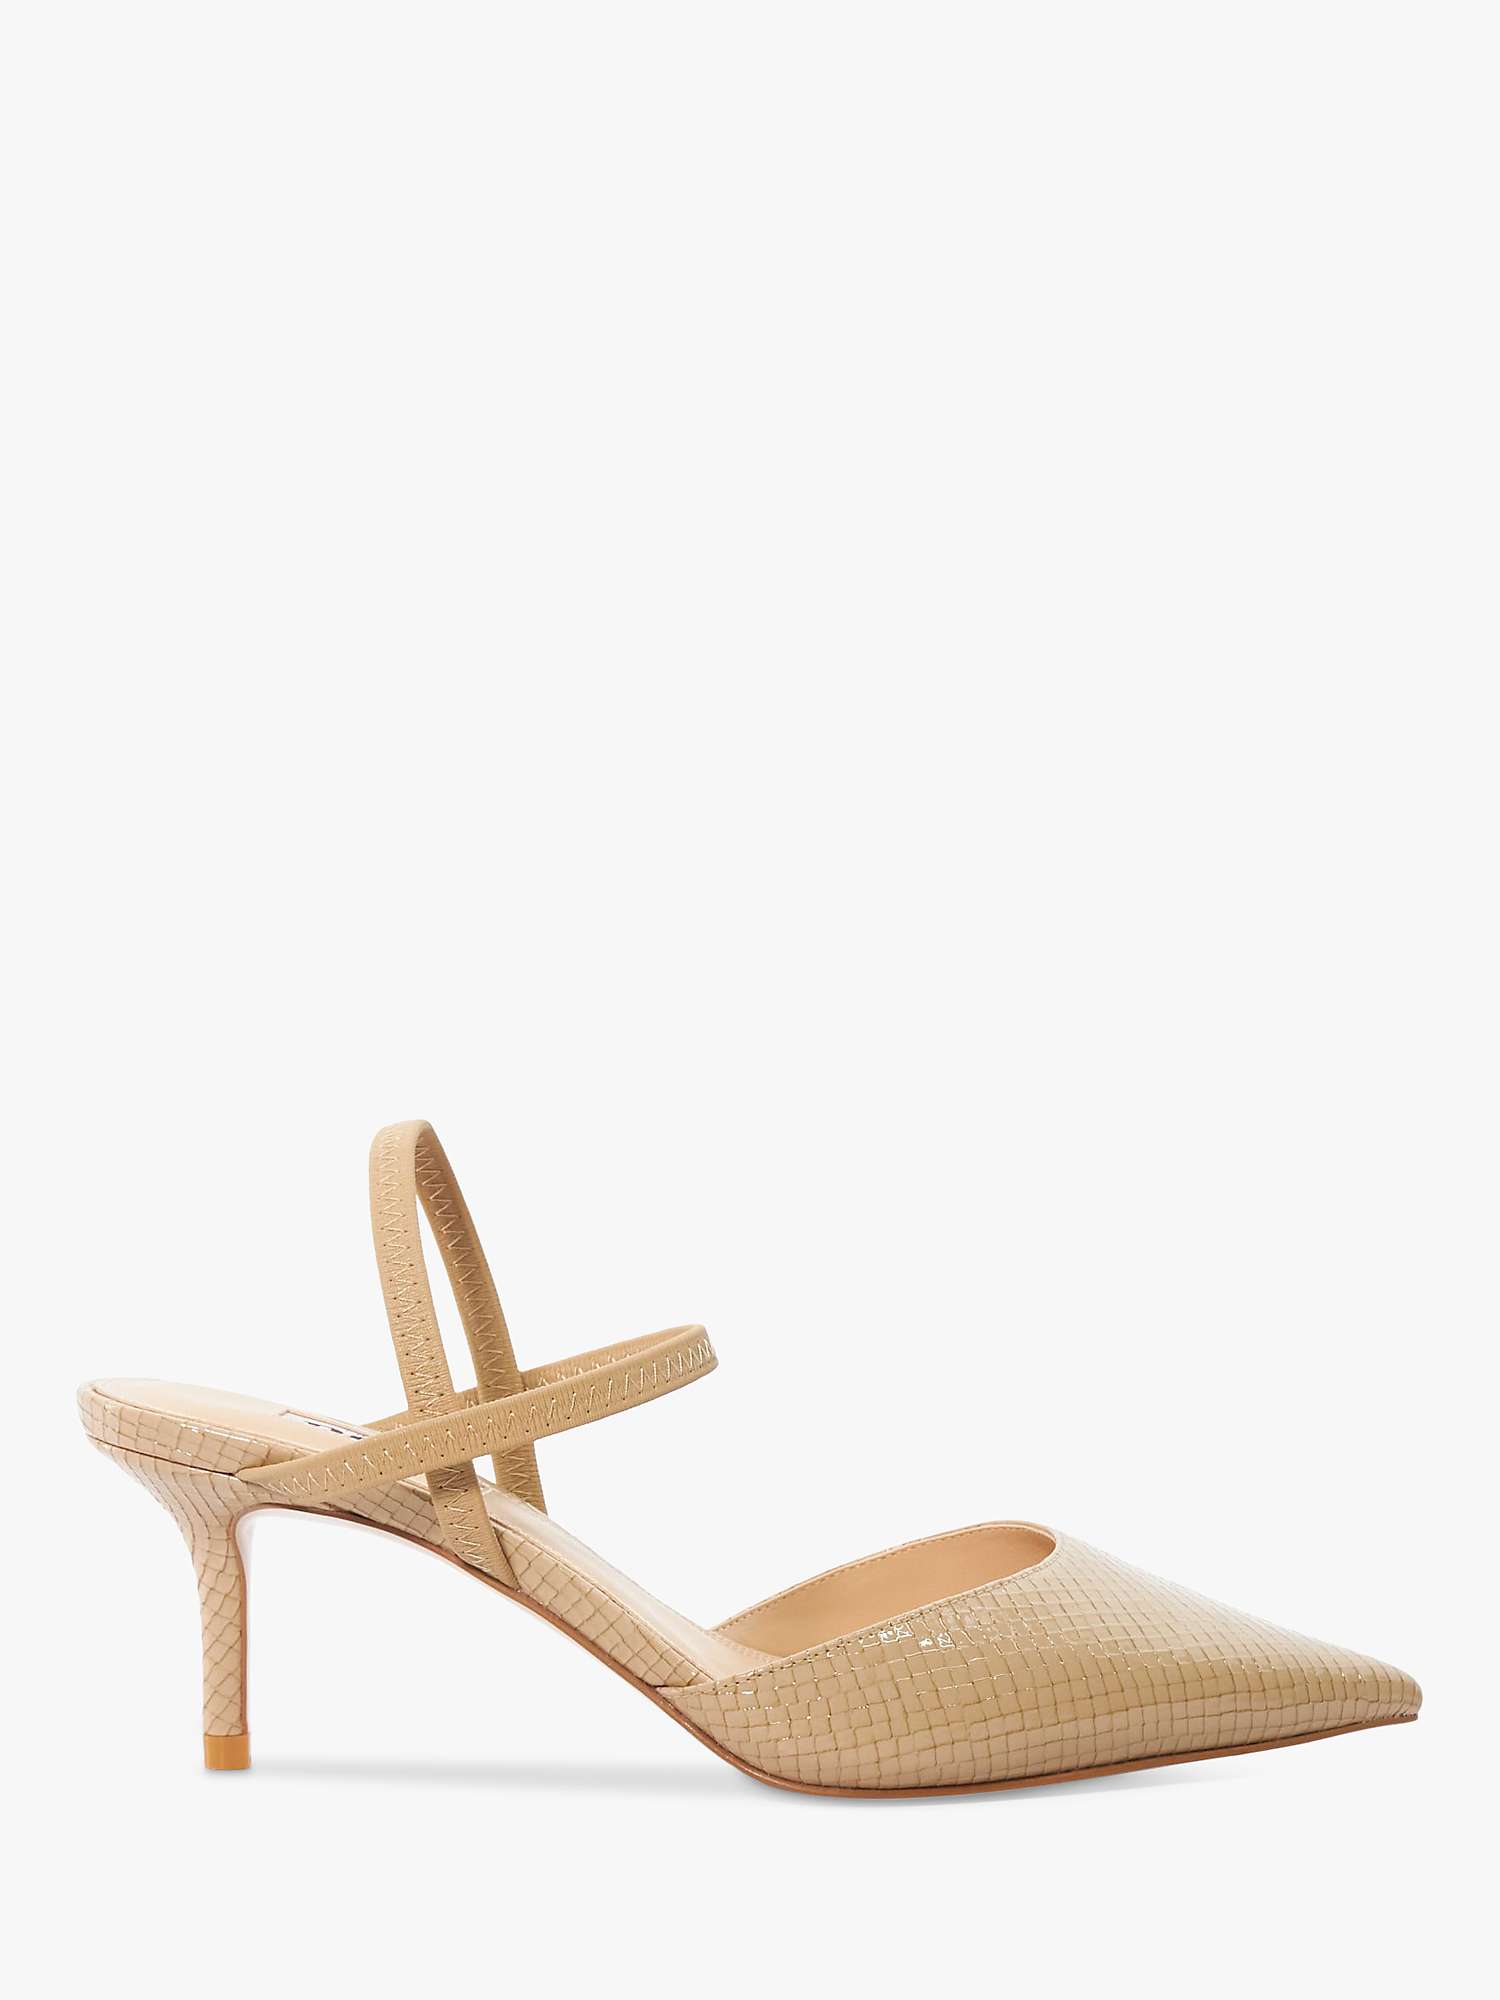 Buy Dune Classical Slingback Mid Heel Court Shoes, Blush Online at johnlewis.com